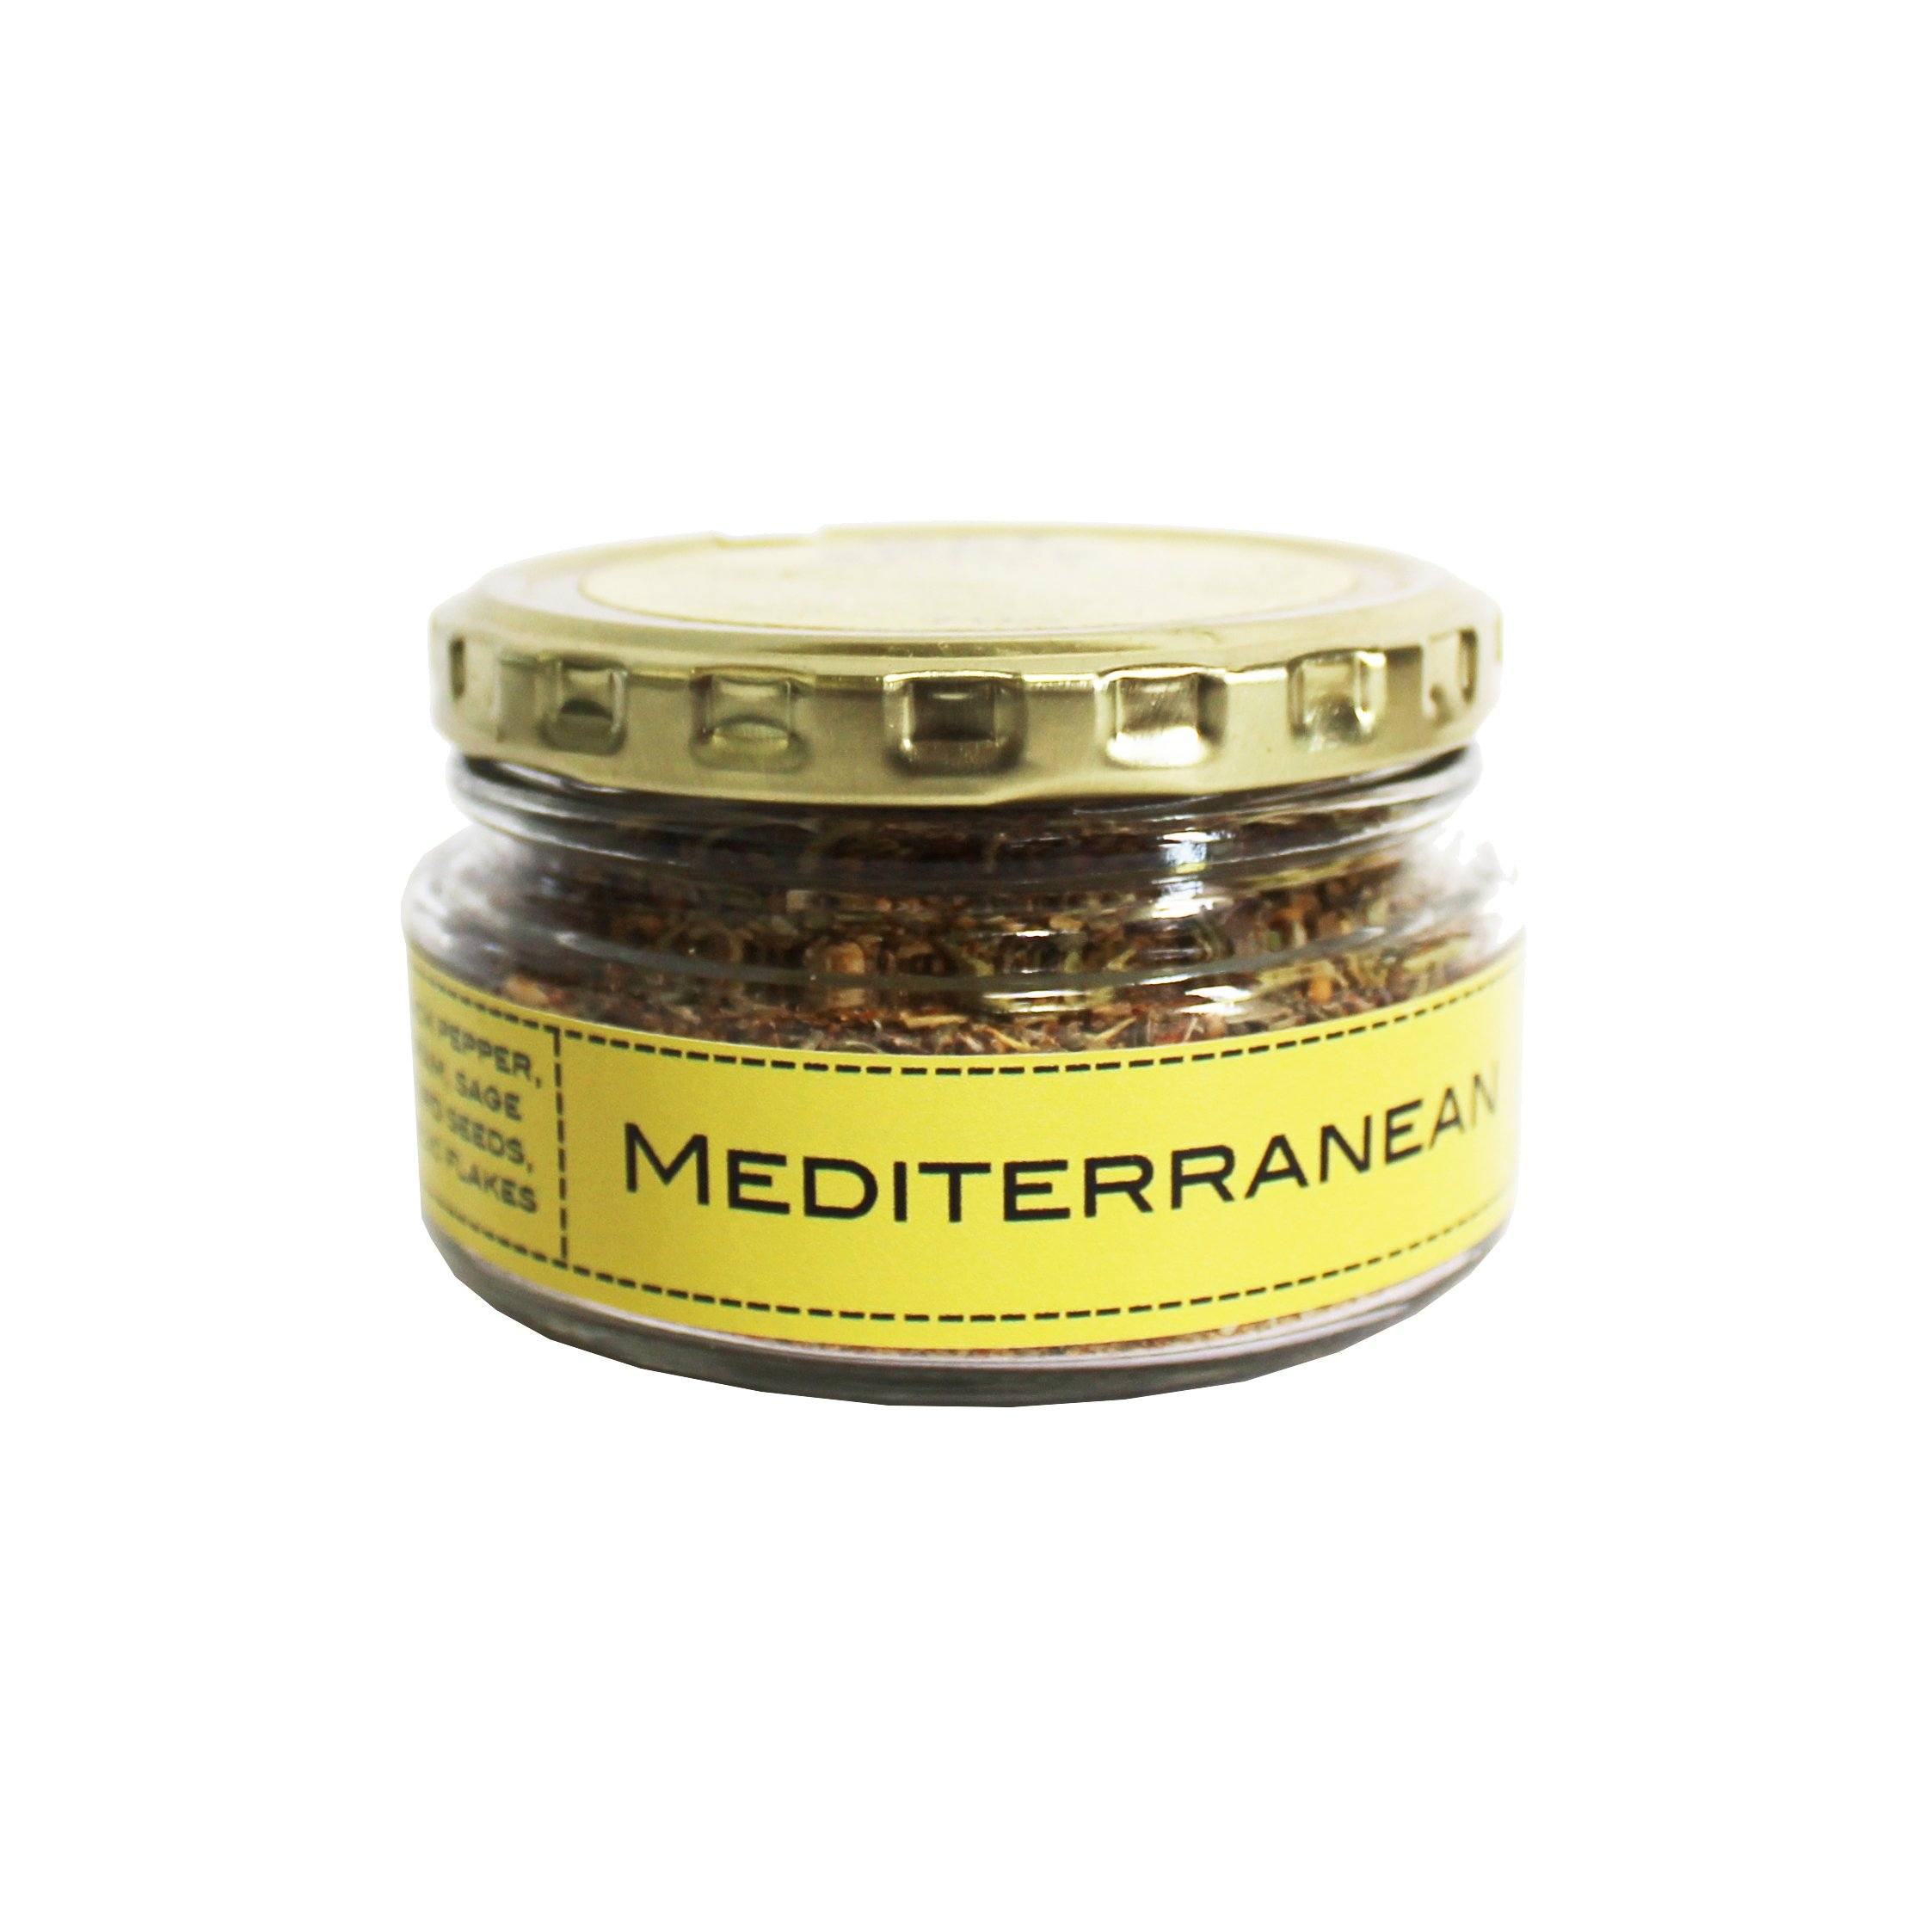 Get Spice Mediterranean Rub 70g | Made by Artisans | Reviews on Judge.me